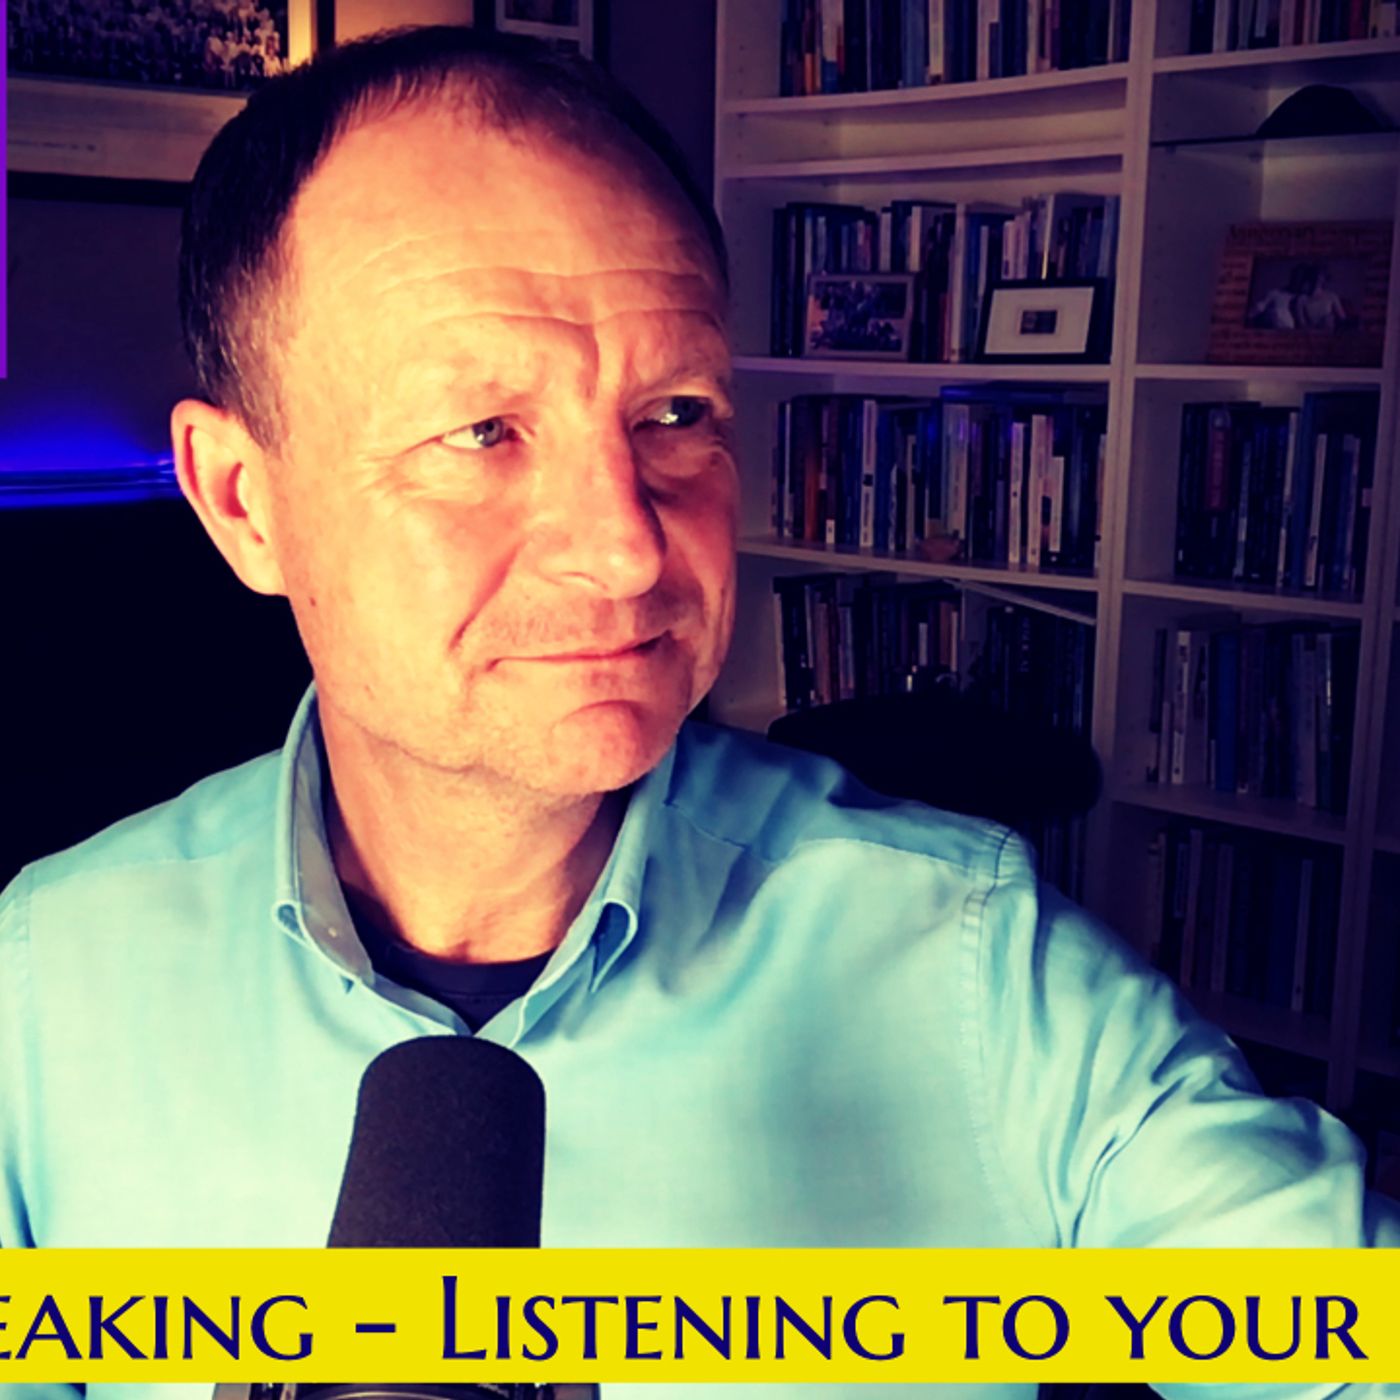 S2 Ep2189: Teaching Tip 359 | “Plain Speaking - Listening to your Listeners” | Malcolm Cox